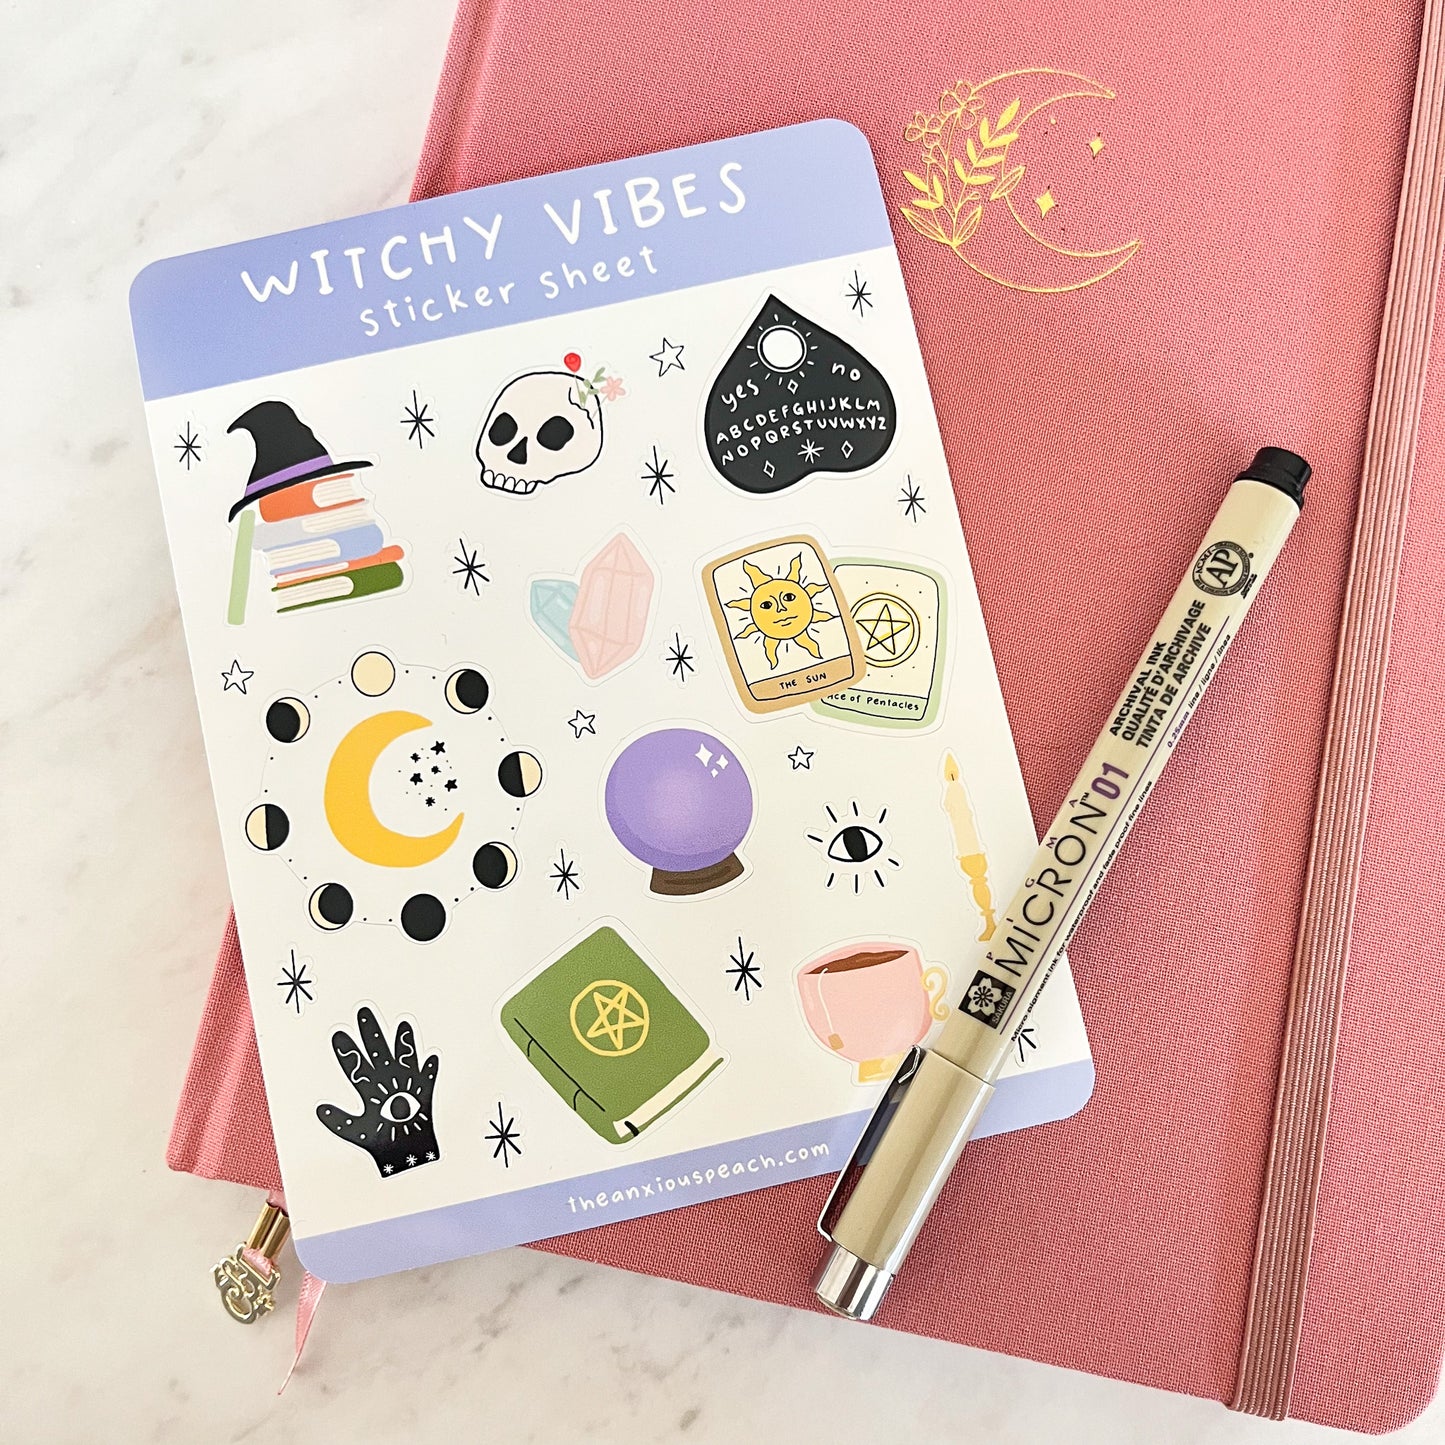 Witchy Vibes Sticker Sheet